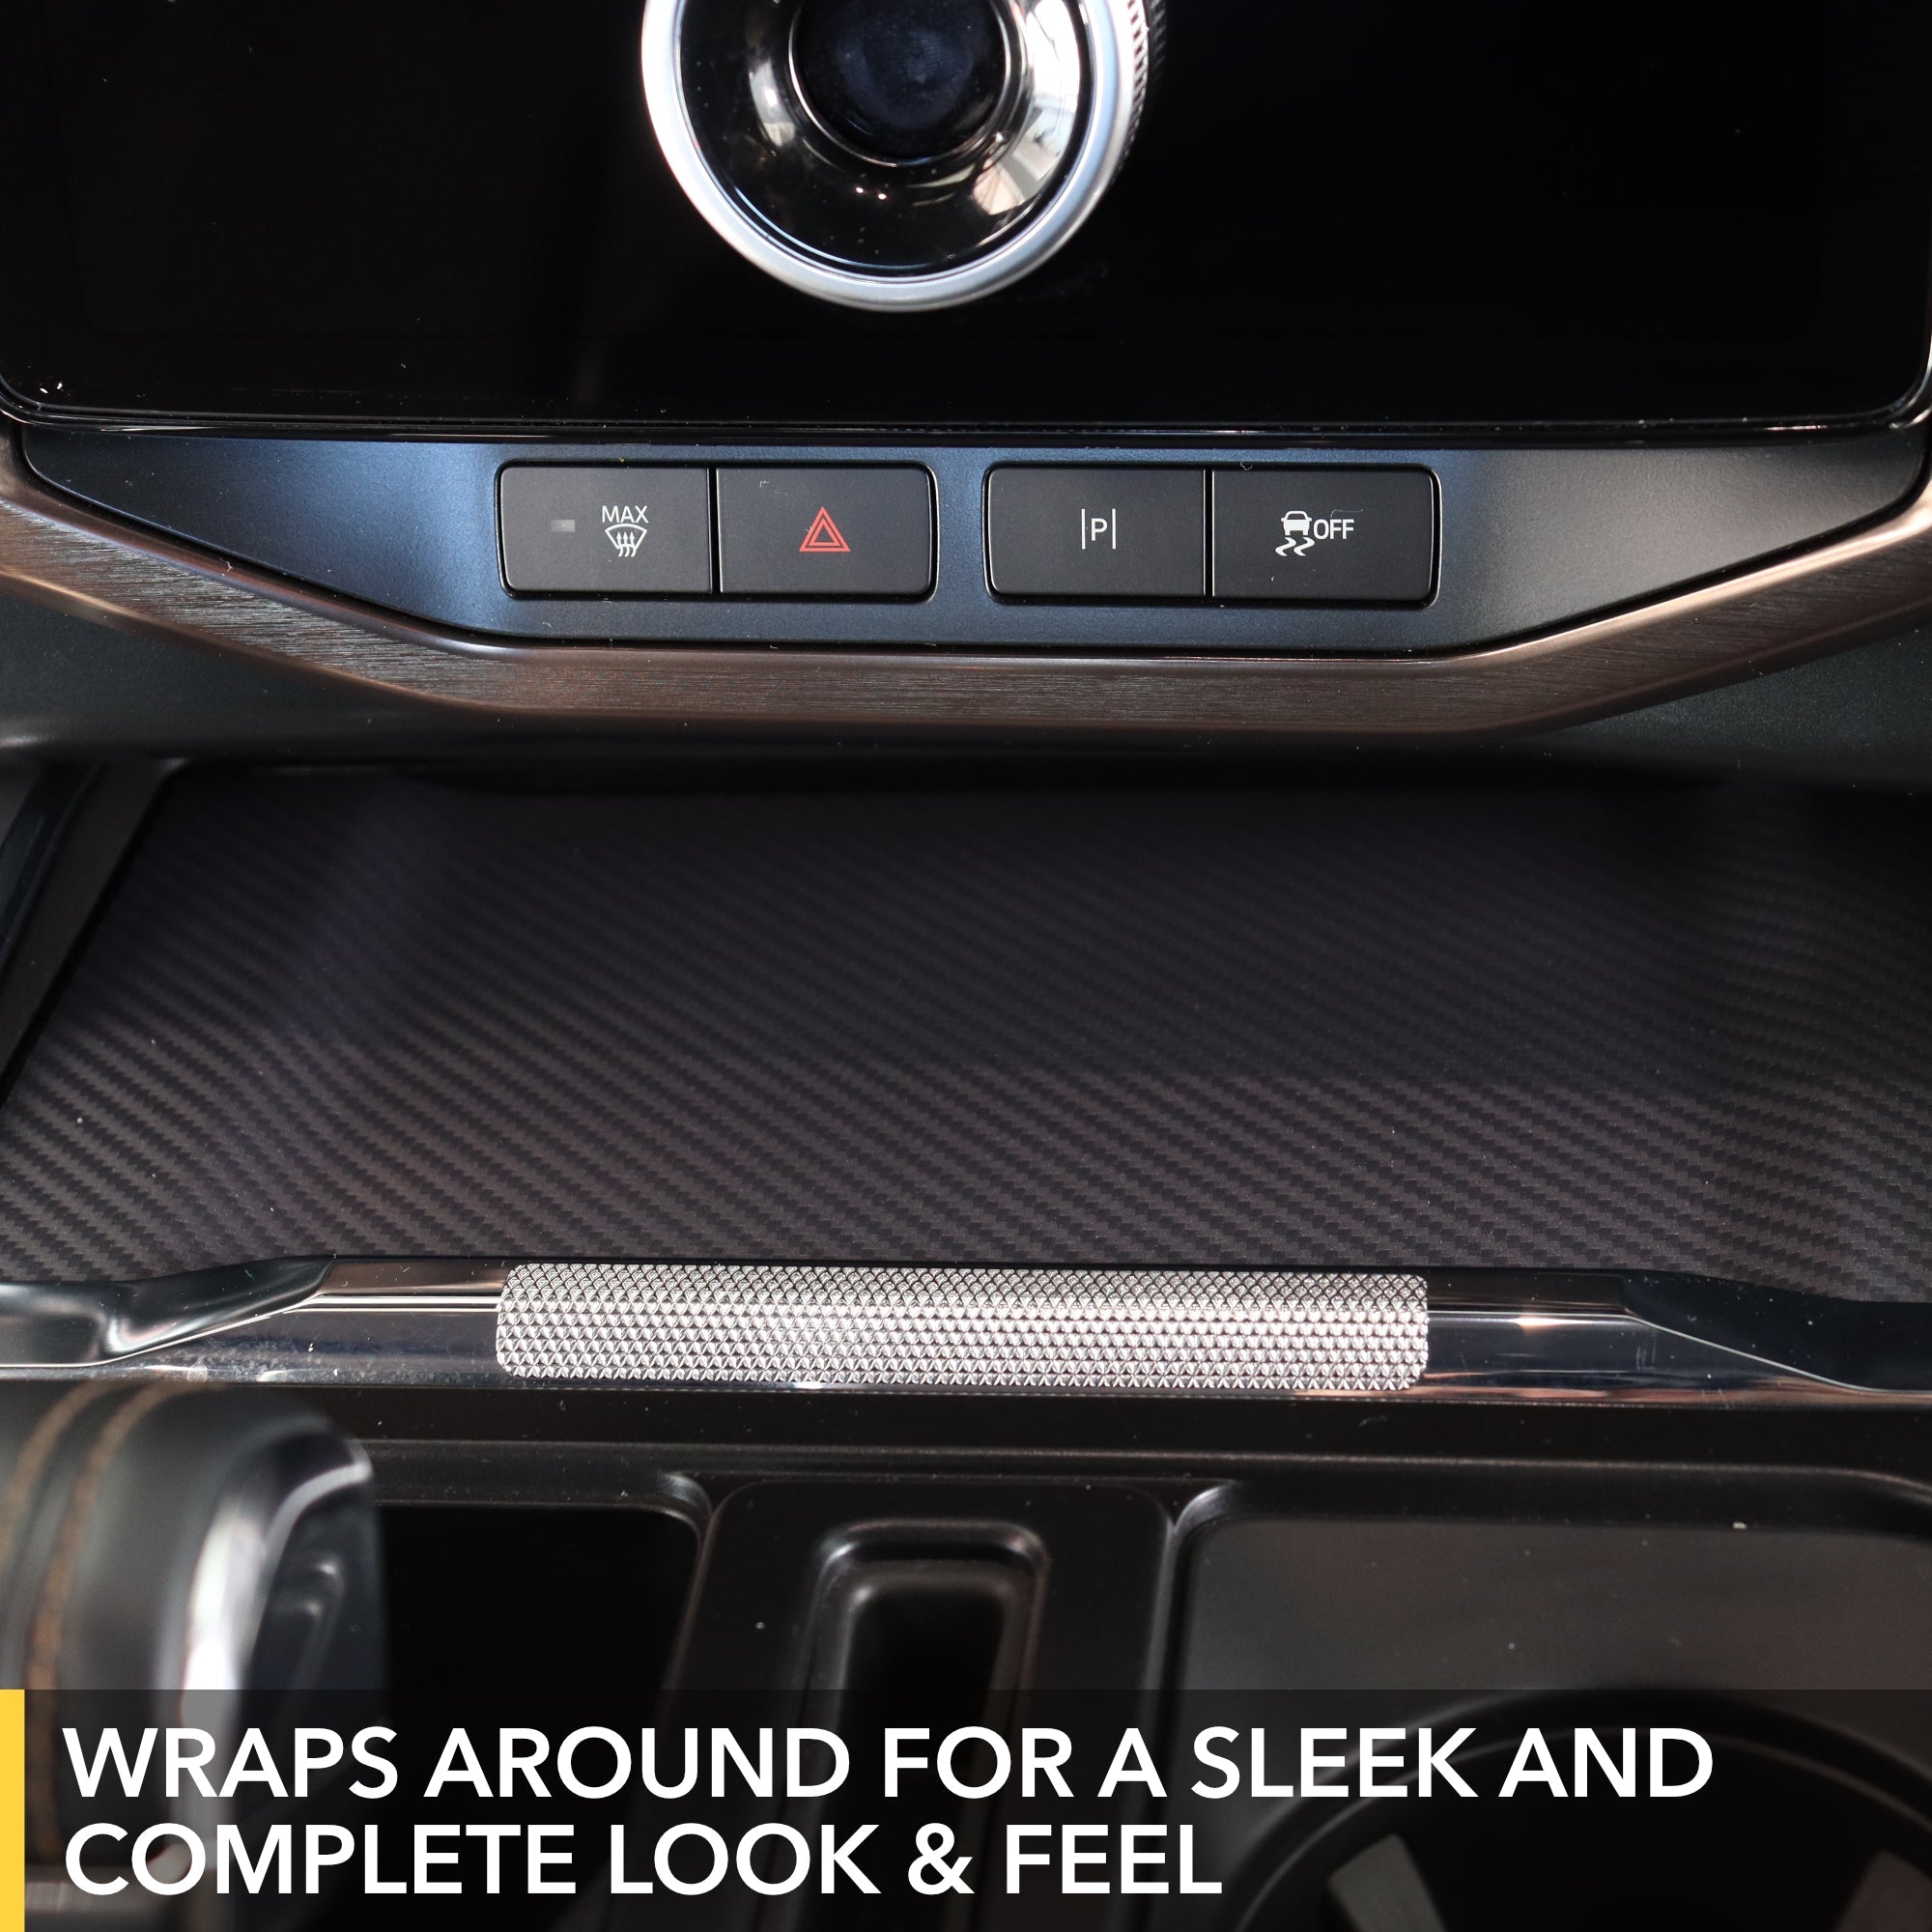 Interior Wrap for Ford F-150 Lightning - includes Dash, Door Trims and Phone Charger Lid